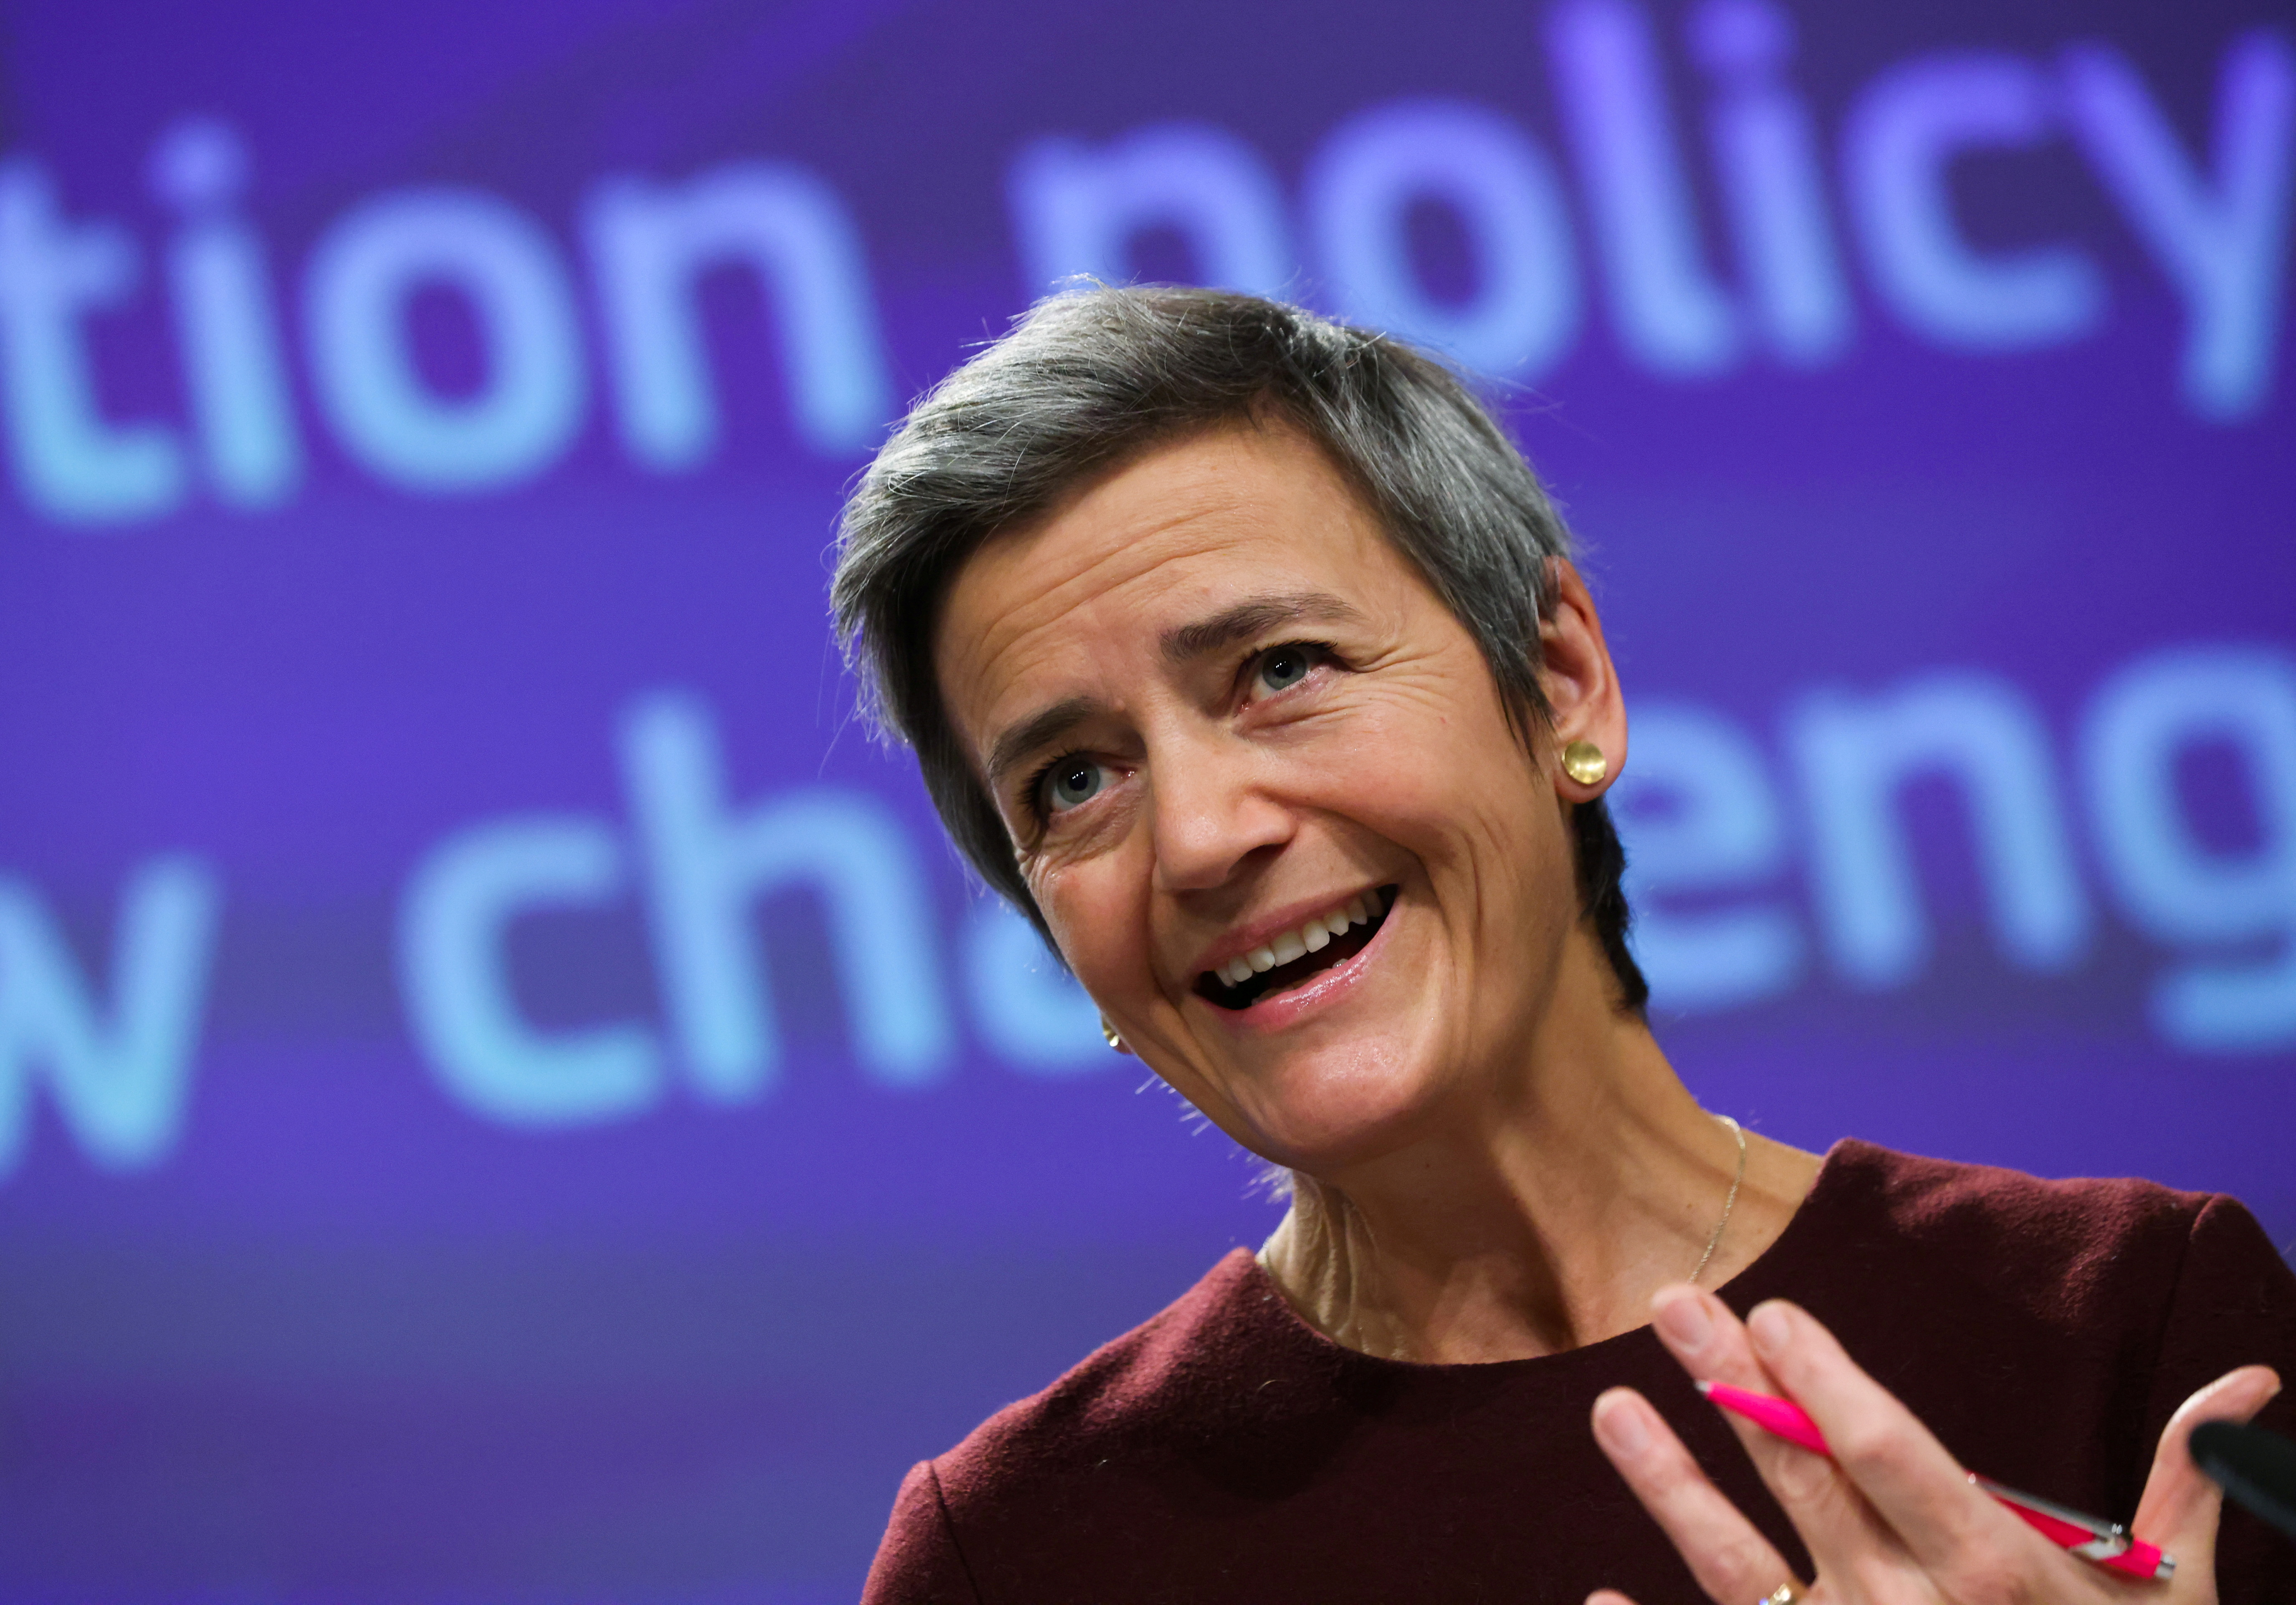 EU Commission Executive Vice-President Margrethe Vestager holds a news conference on European Commission's competition policy, in Brussels, Belgium November 18, 2021, REUTERS/Yves Herman